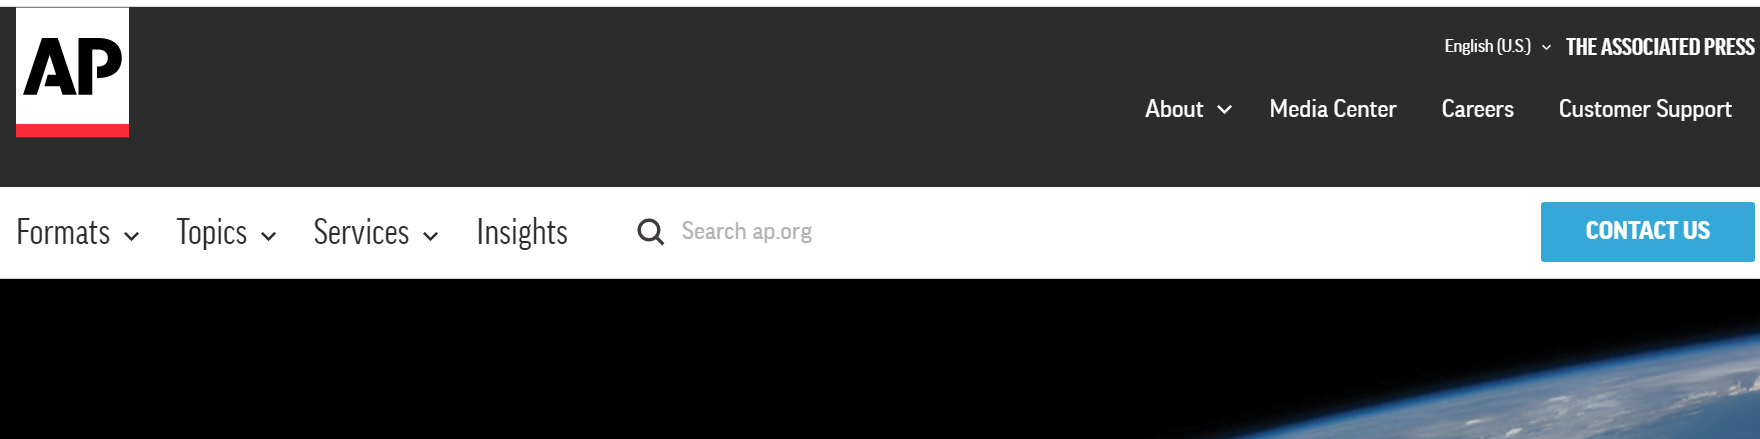 Associated Press Header search bar from the homepage